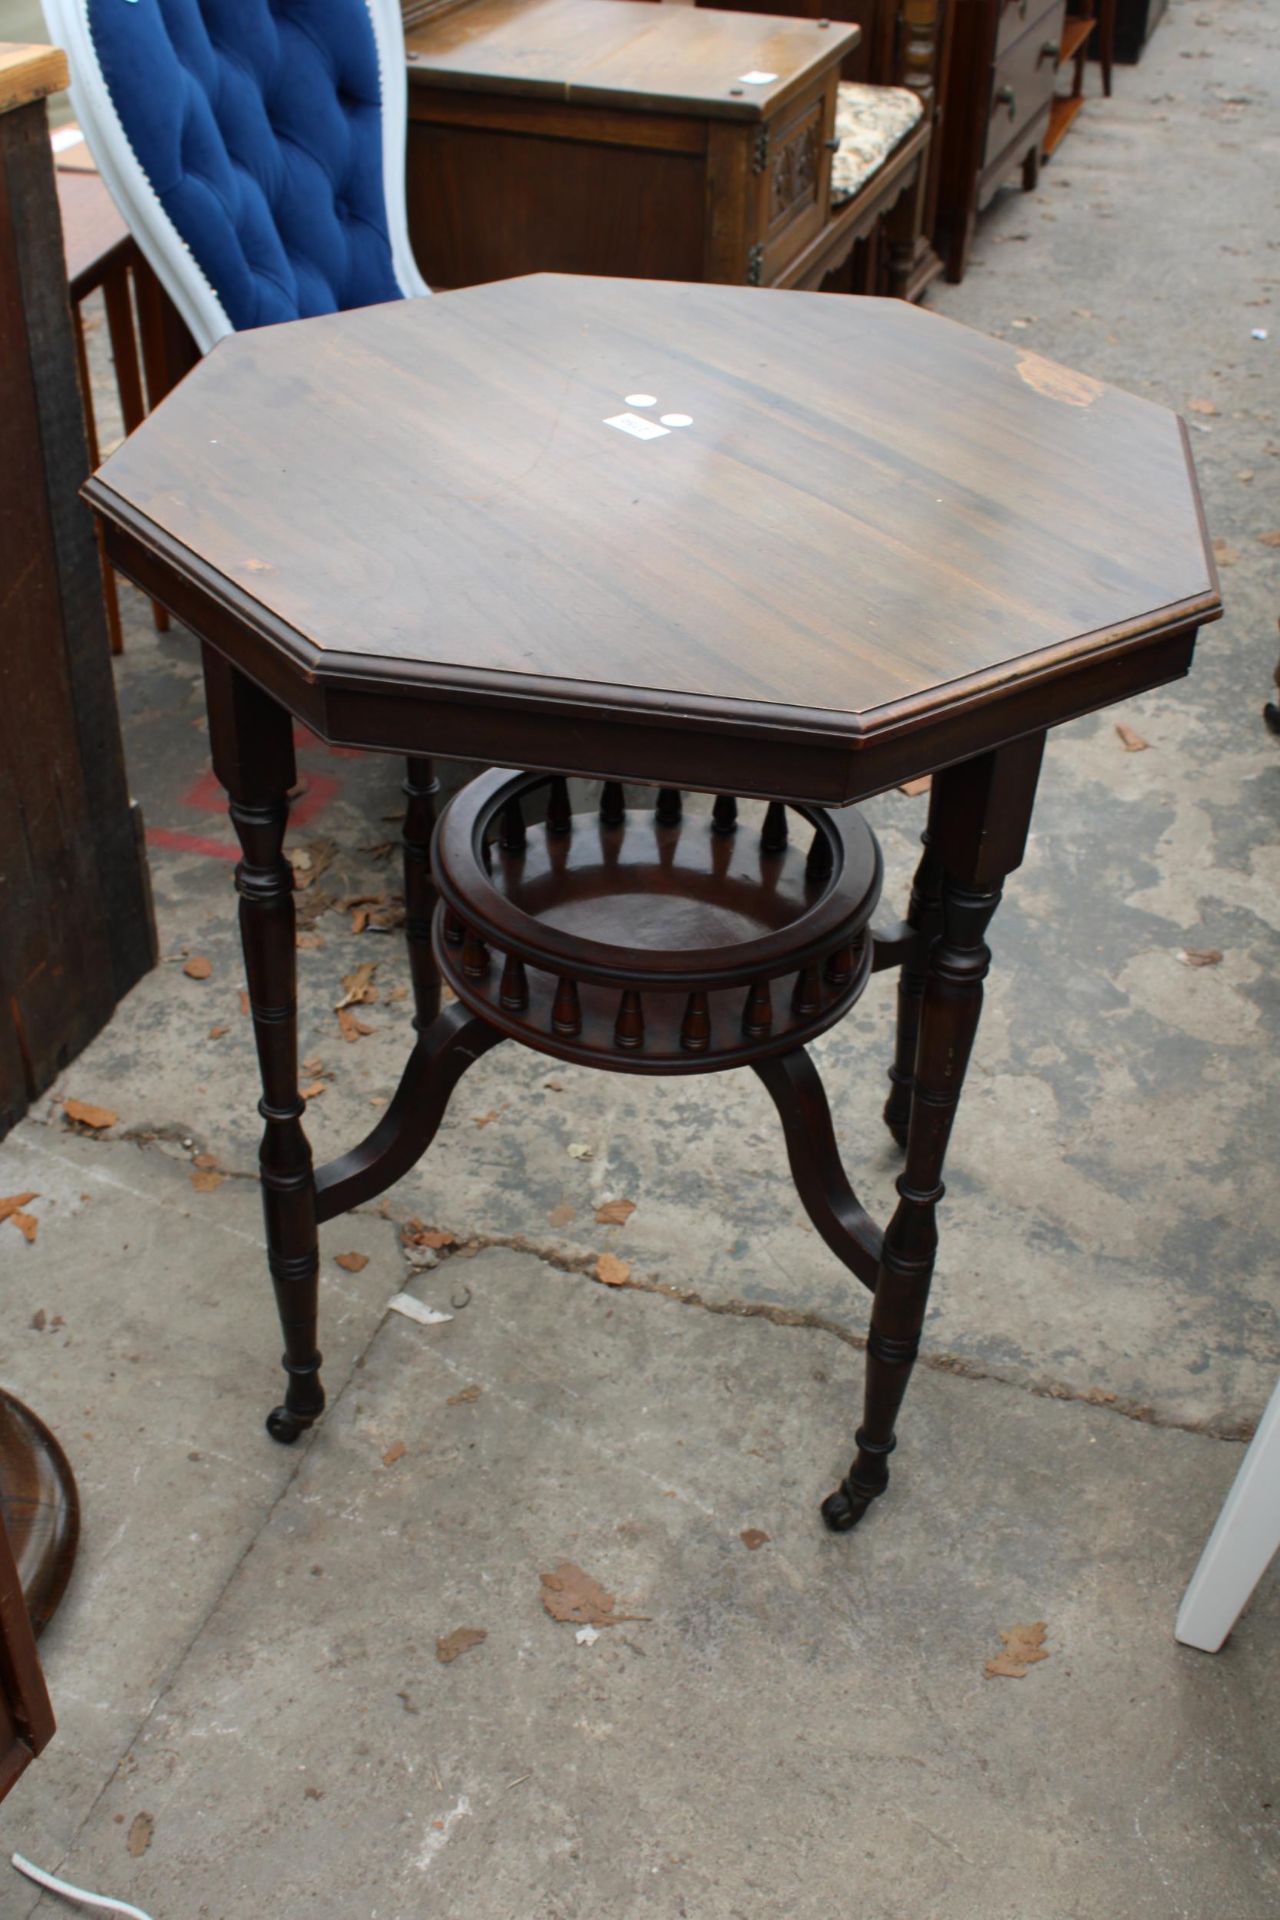 AN OCTAGONAL LATE VICTORIAN CENTRE TABLE WITH GALLERIED UNDER TIER, 27" ACROSS